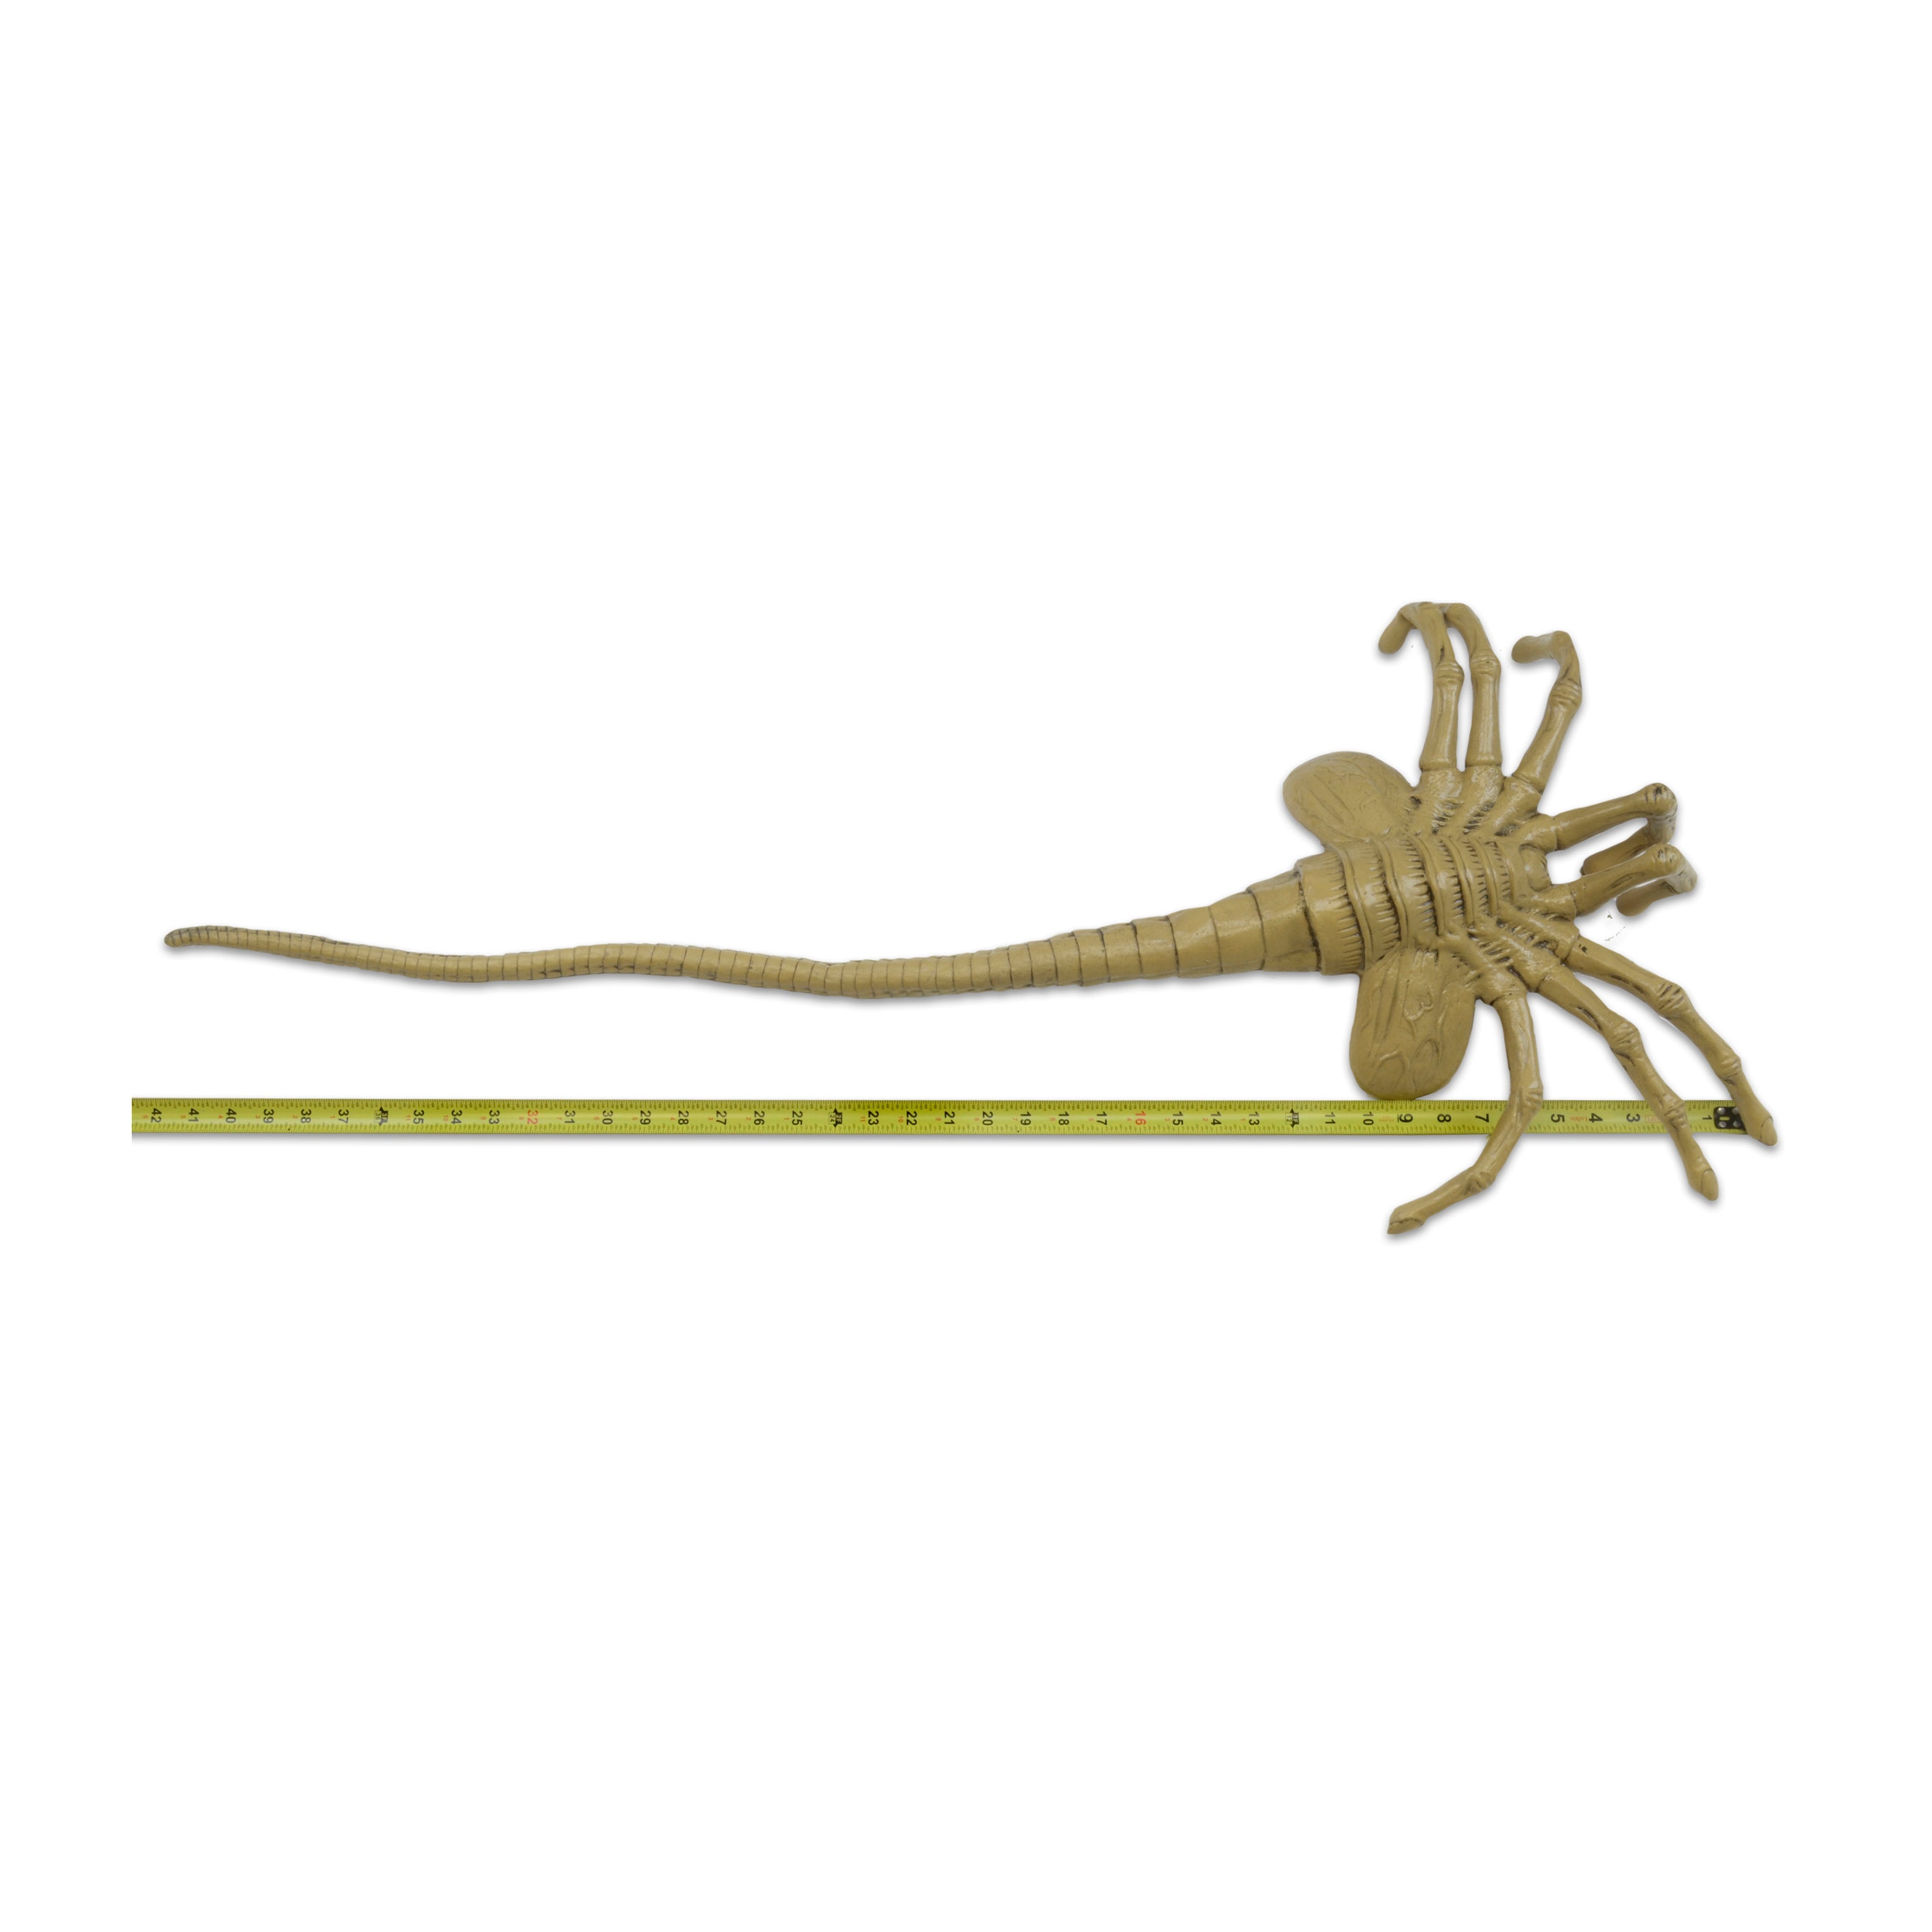 Life-size Facehugger foam replica back with tape measure showing size